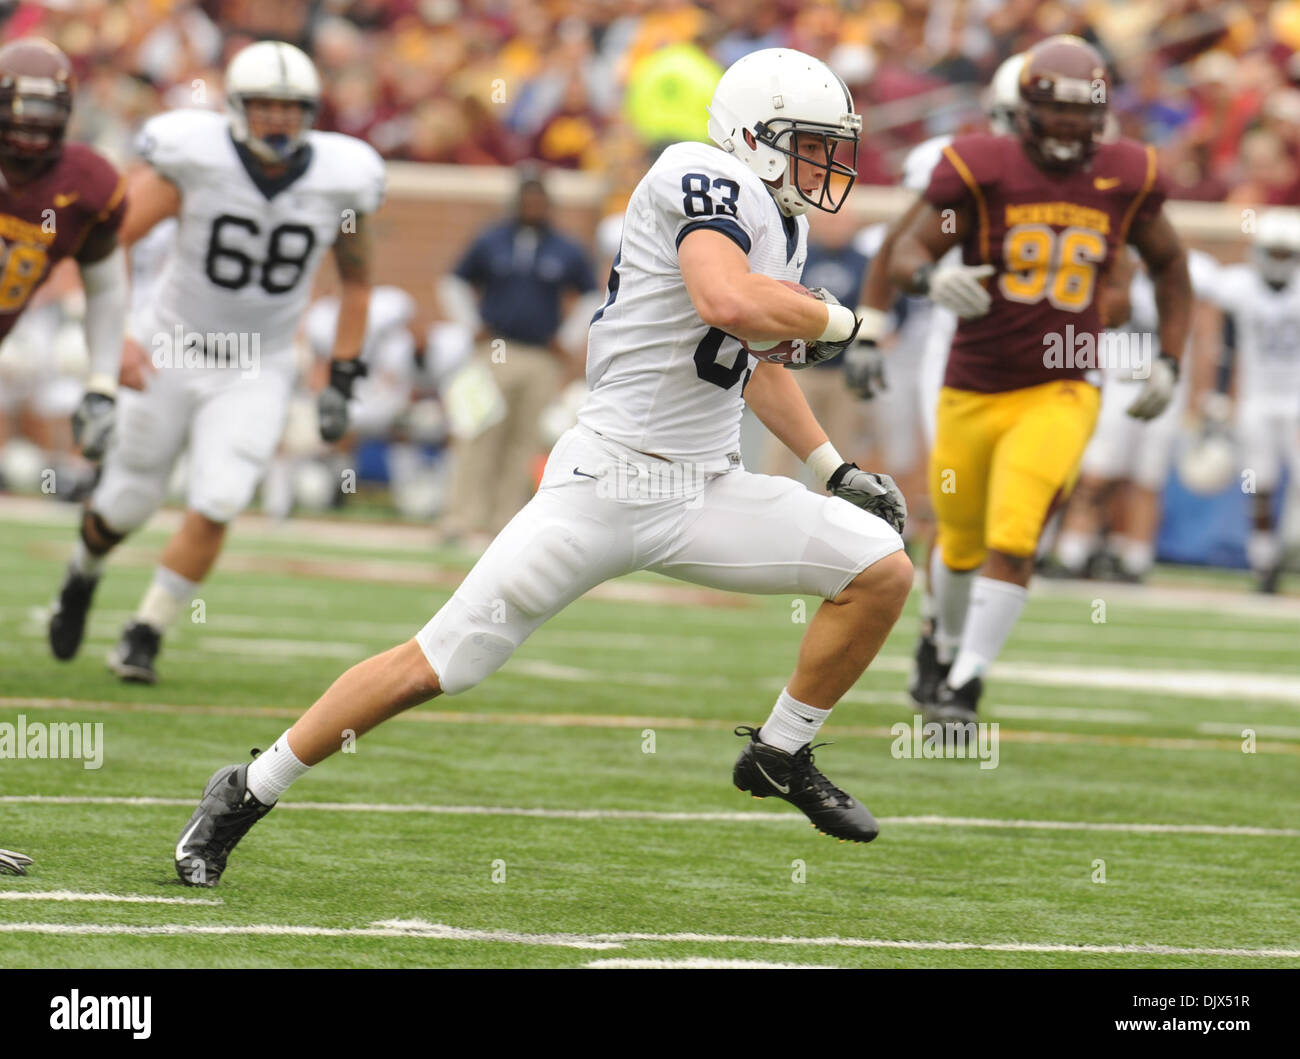 Oct. 23, 2010 - Minneapolis, Minnesota, United States of America - Penn State University wide receiver Brett Brackett (#83) makes the catch for a 21 yard touchdown in the first quarter of the game at the TCF Stadium in Minneapolis, Minnesota. (Credit Image: © Marilyn Indahl/Southcreek Global/ZUMApress.com) Stock Photo